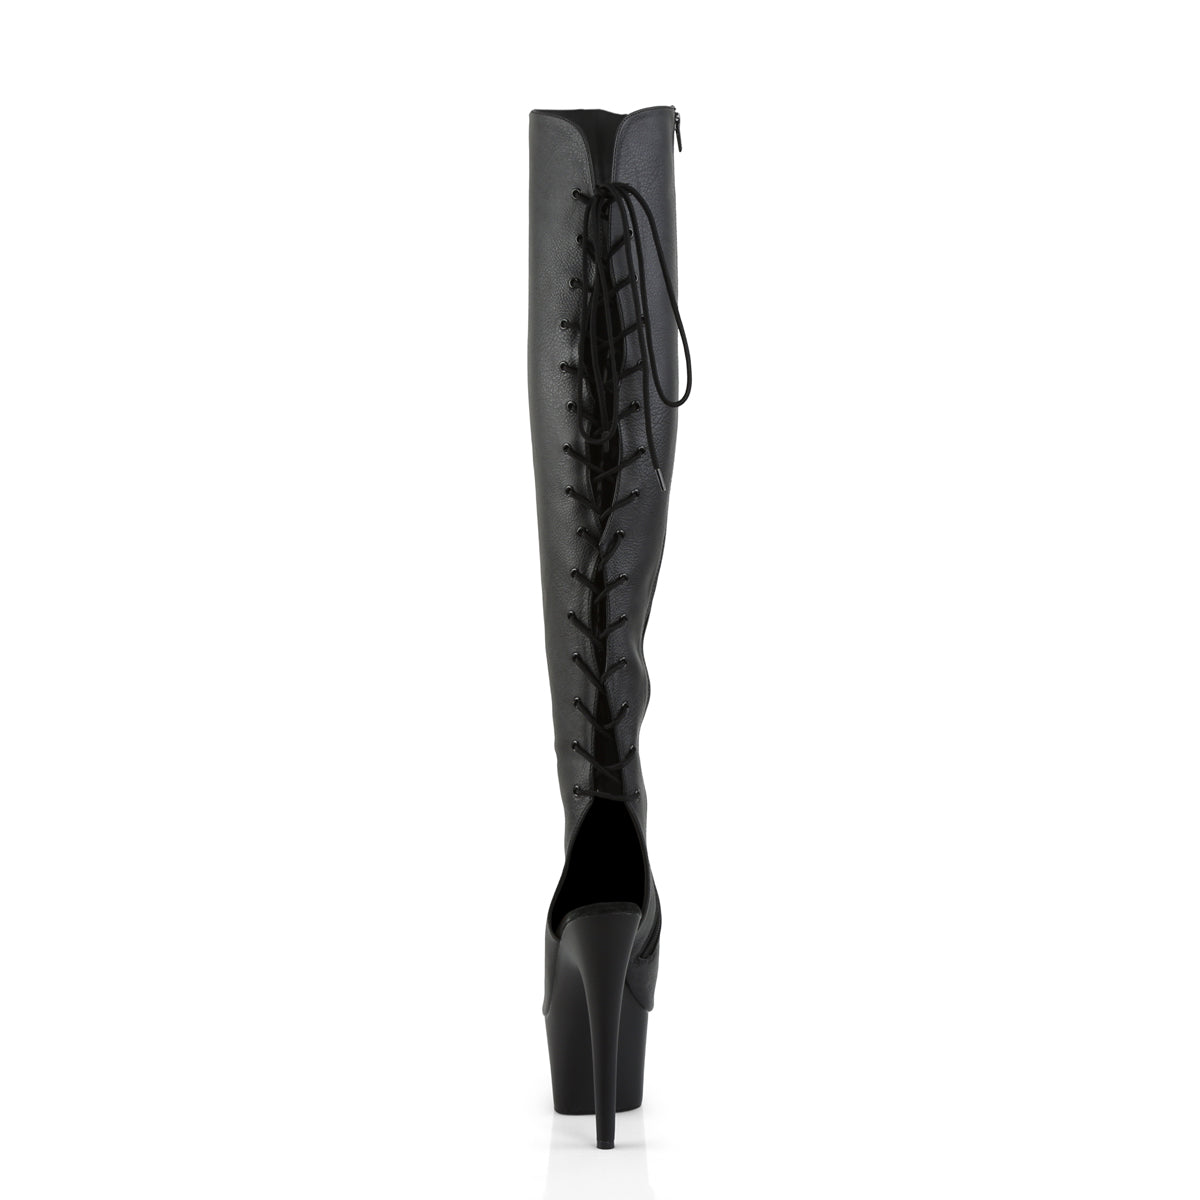 ADORE-3019 7" Heel Black Pole Dancing Thigh High Boots-Pleaser- Sexy Shoes Fetish Footwear